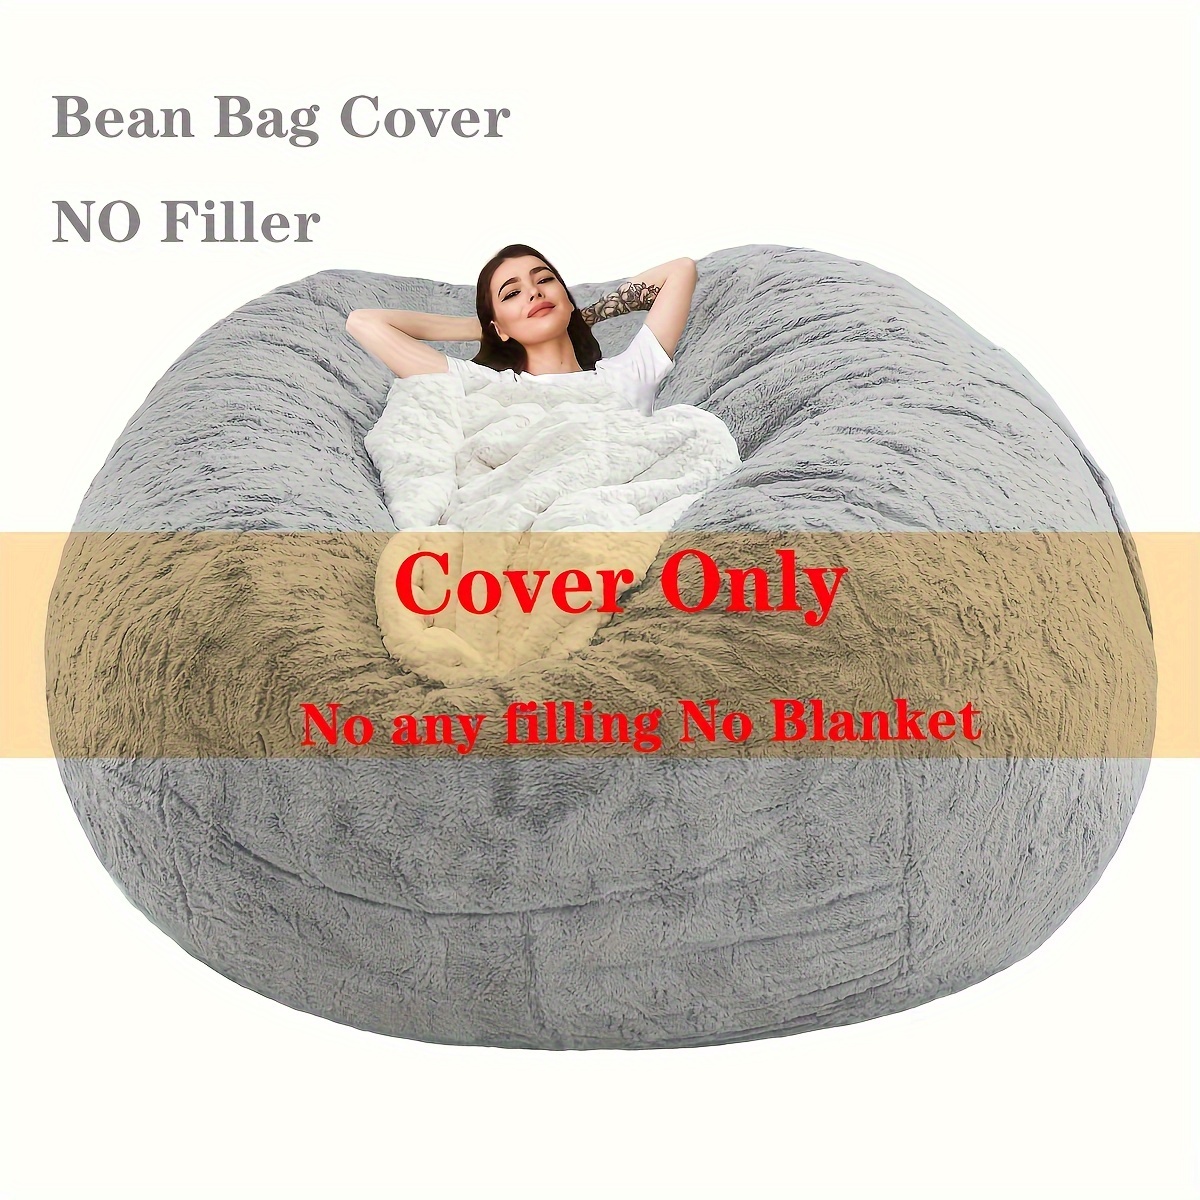 1pc Extra Large Bean Bag Sofa Chair Cover (cover Only,no Fillings), Soft &  Fluffy Pv Velvet Removable Washable Cover For Bean Bag Sofa Adult Bed,  Living Room & Bedroom Furniture Protector. 150cm*60cm